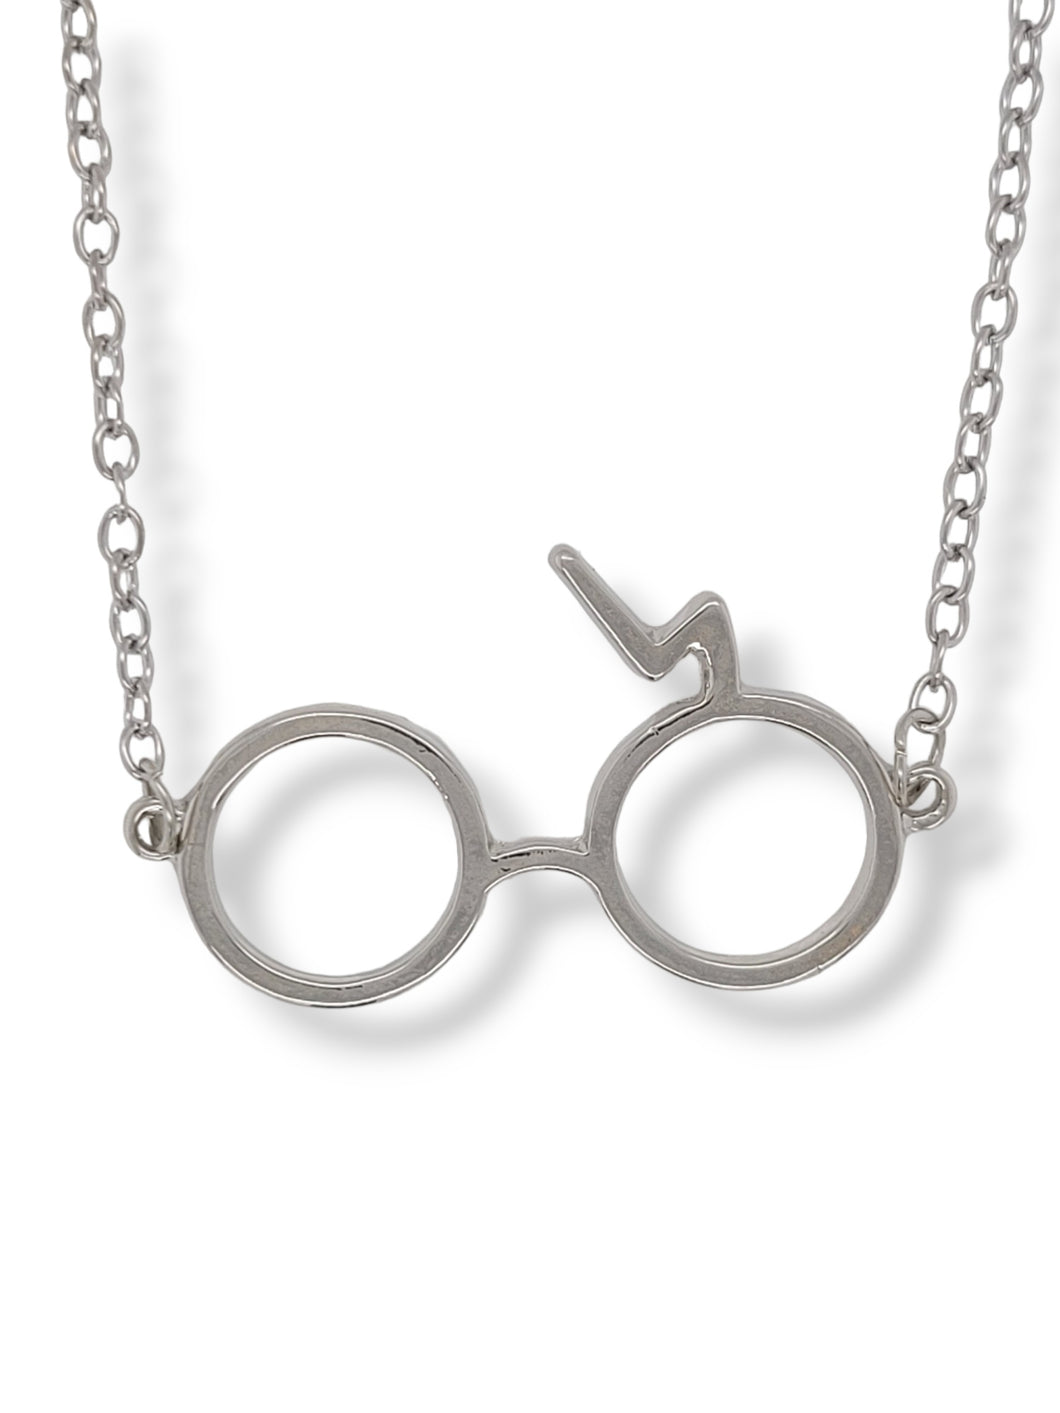 Silver Scar and Glasses Necklace